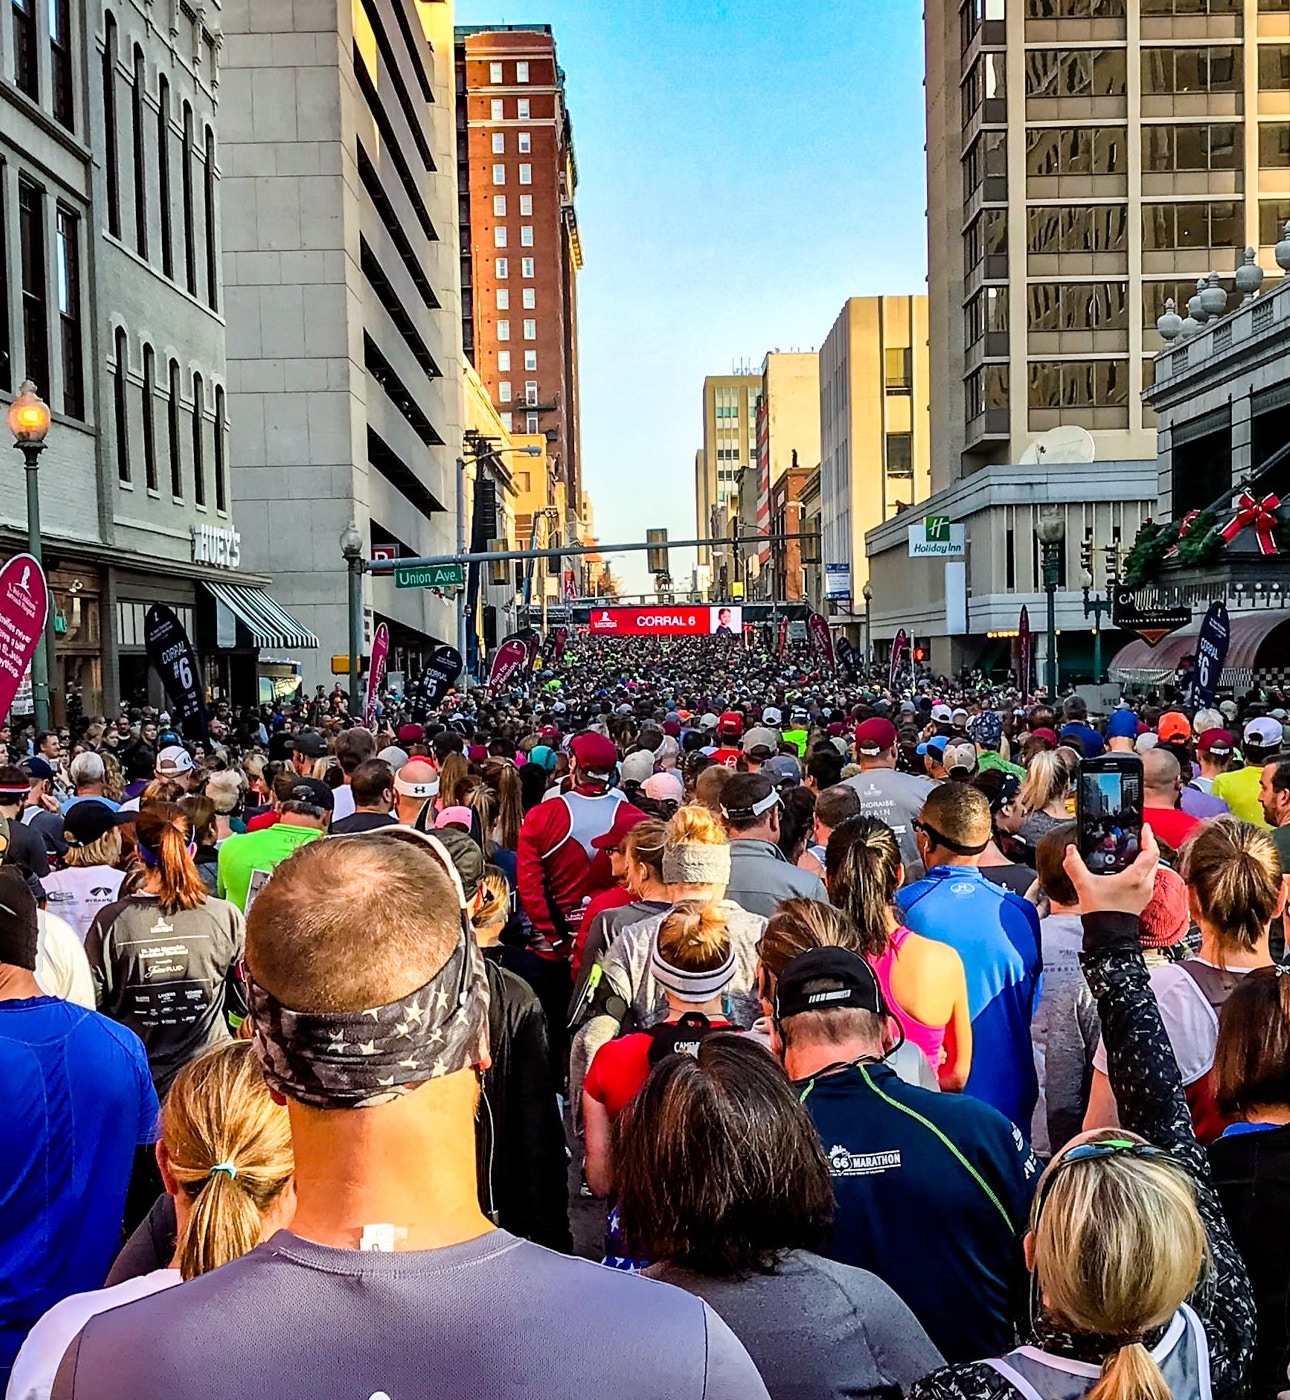 Huge group of runners crowded on city street running together for a marathon event